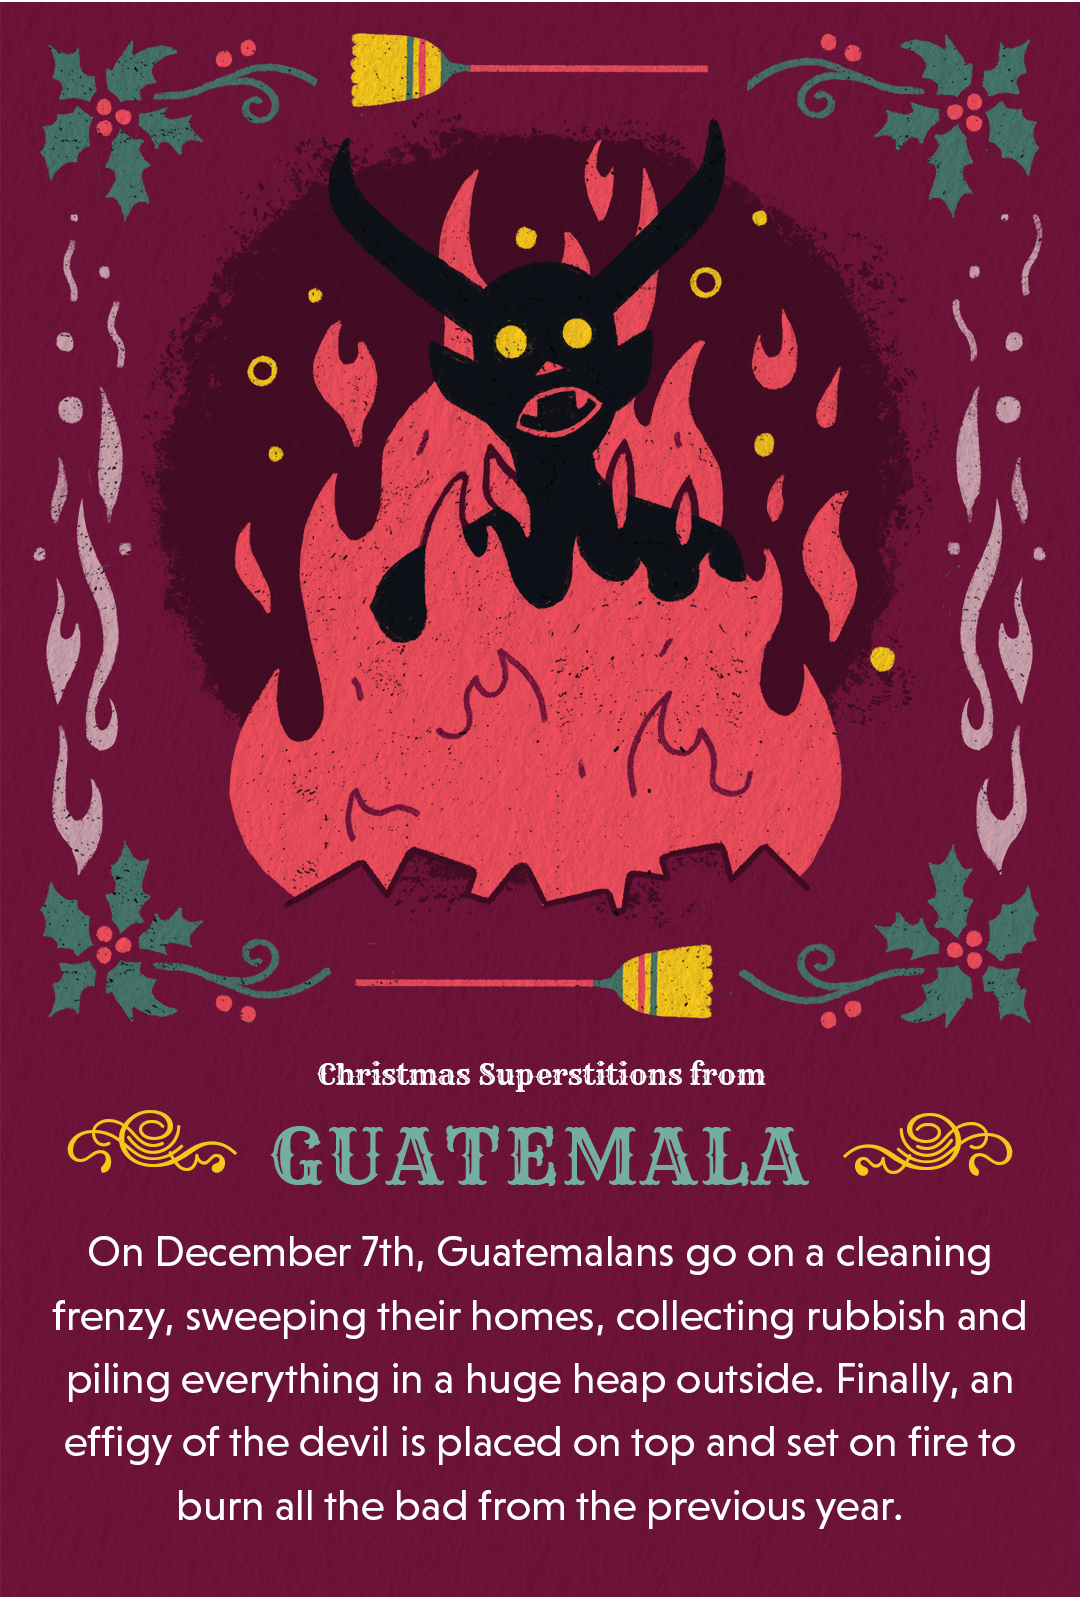 Unusual Christmas folklore from Guatemala